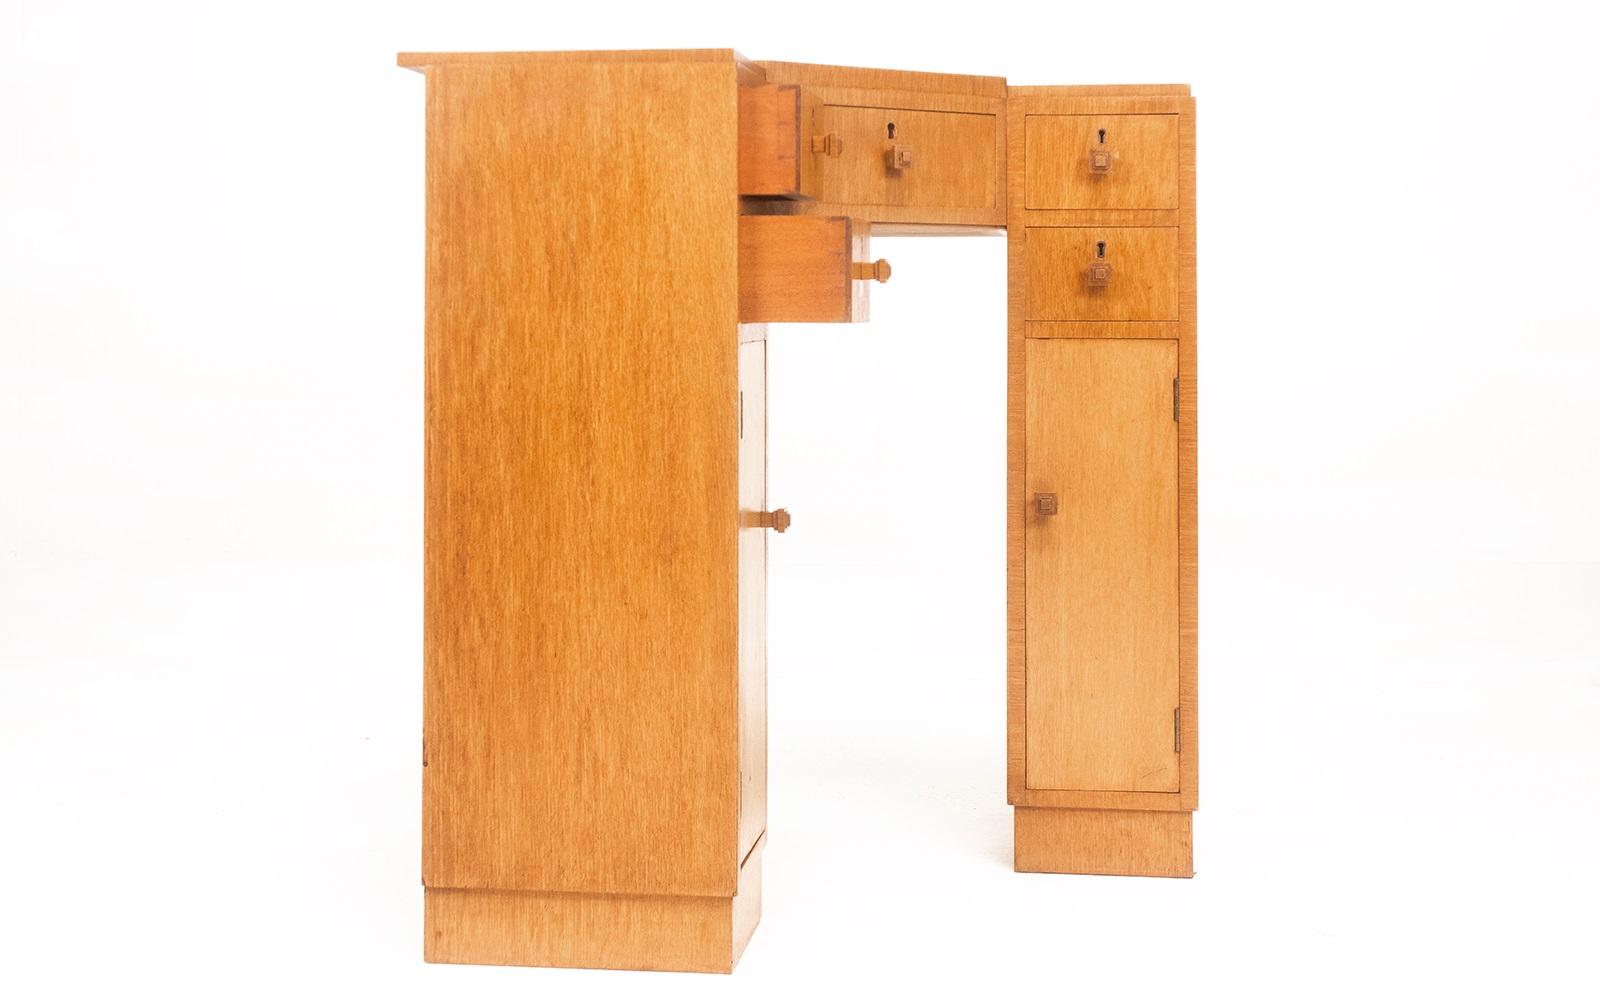 Art Deco corner desk

An Art Deco blonde oak corner desk with five drawers and two cupboards. 

The desk is in a stepped form, and the drawer/door handles are moulded to match.

Very much in the manner of Heals & Co.

English, circa 1930.